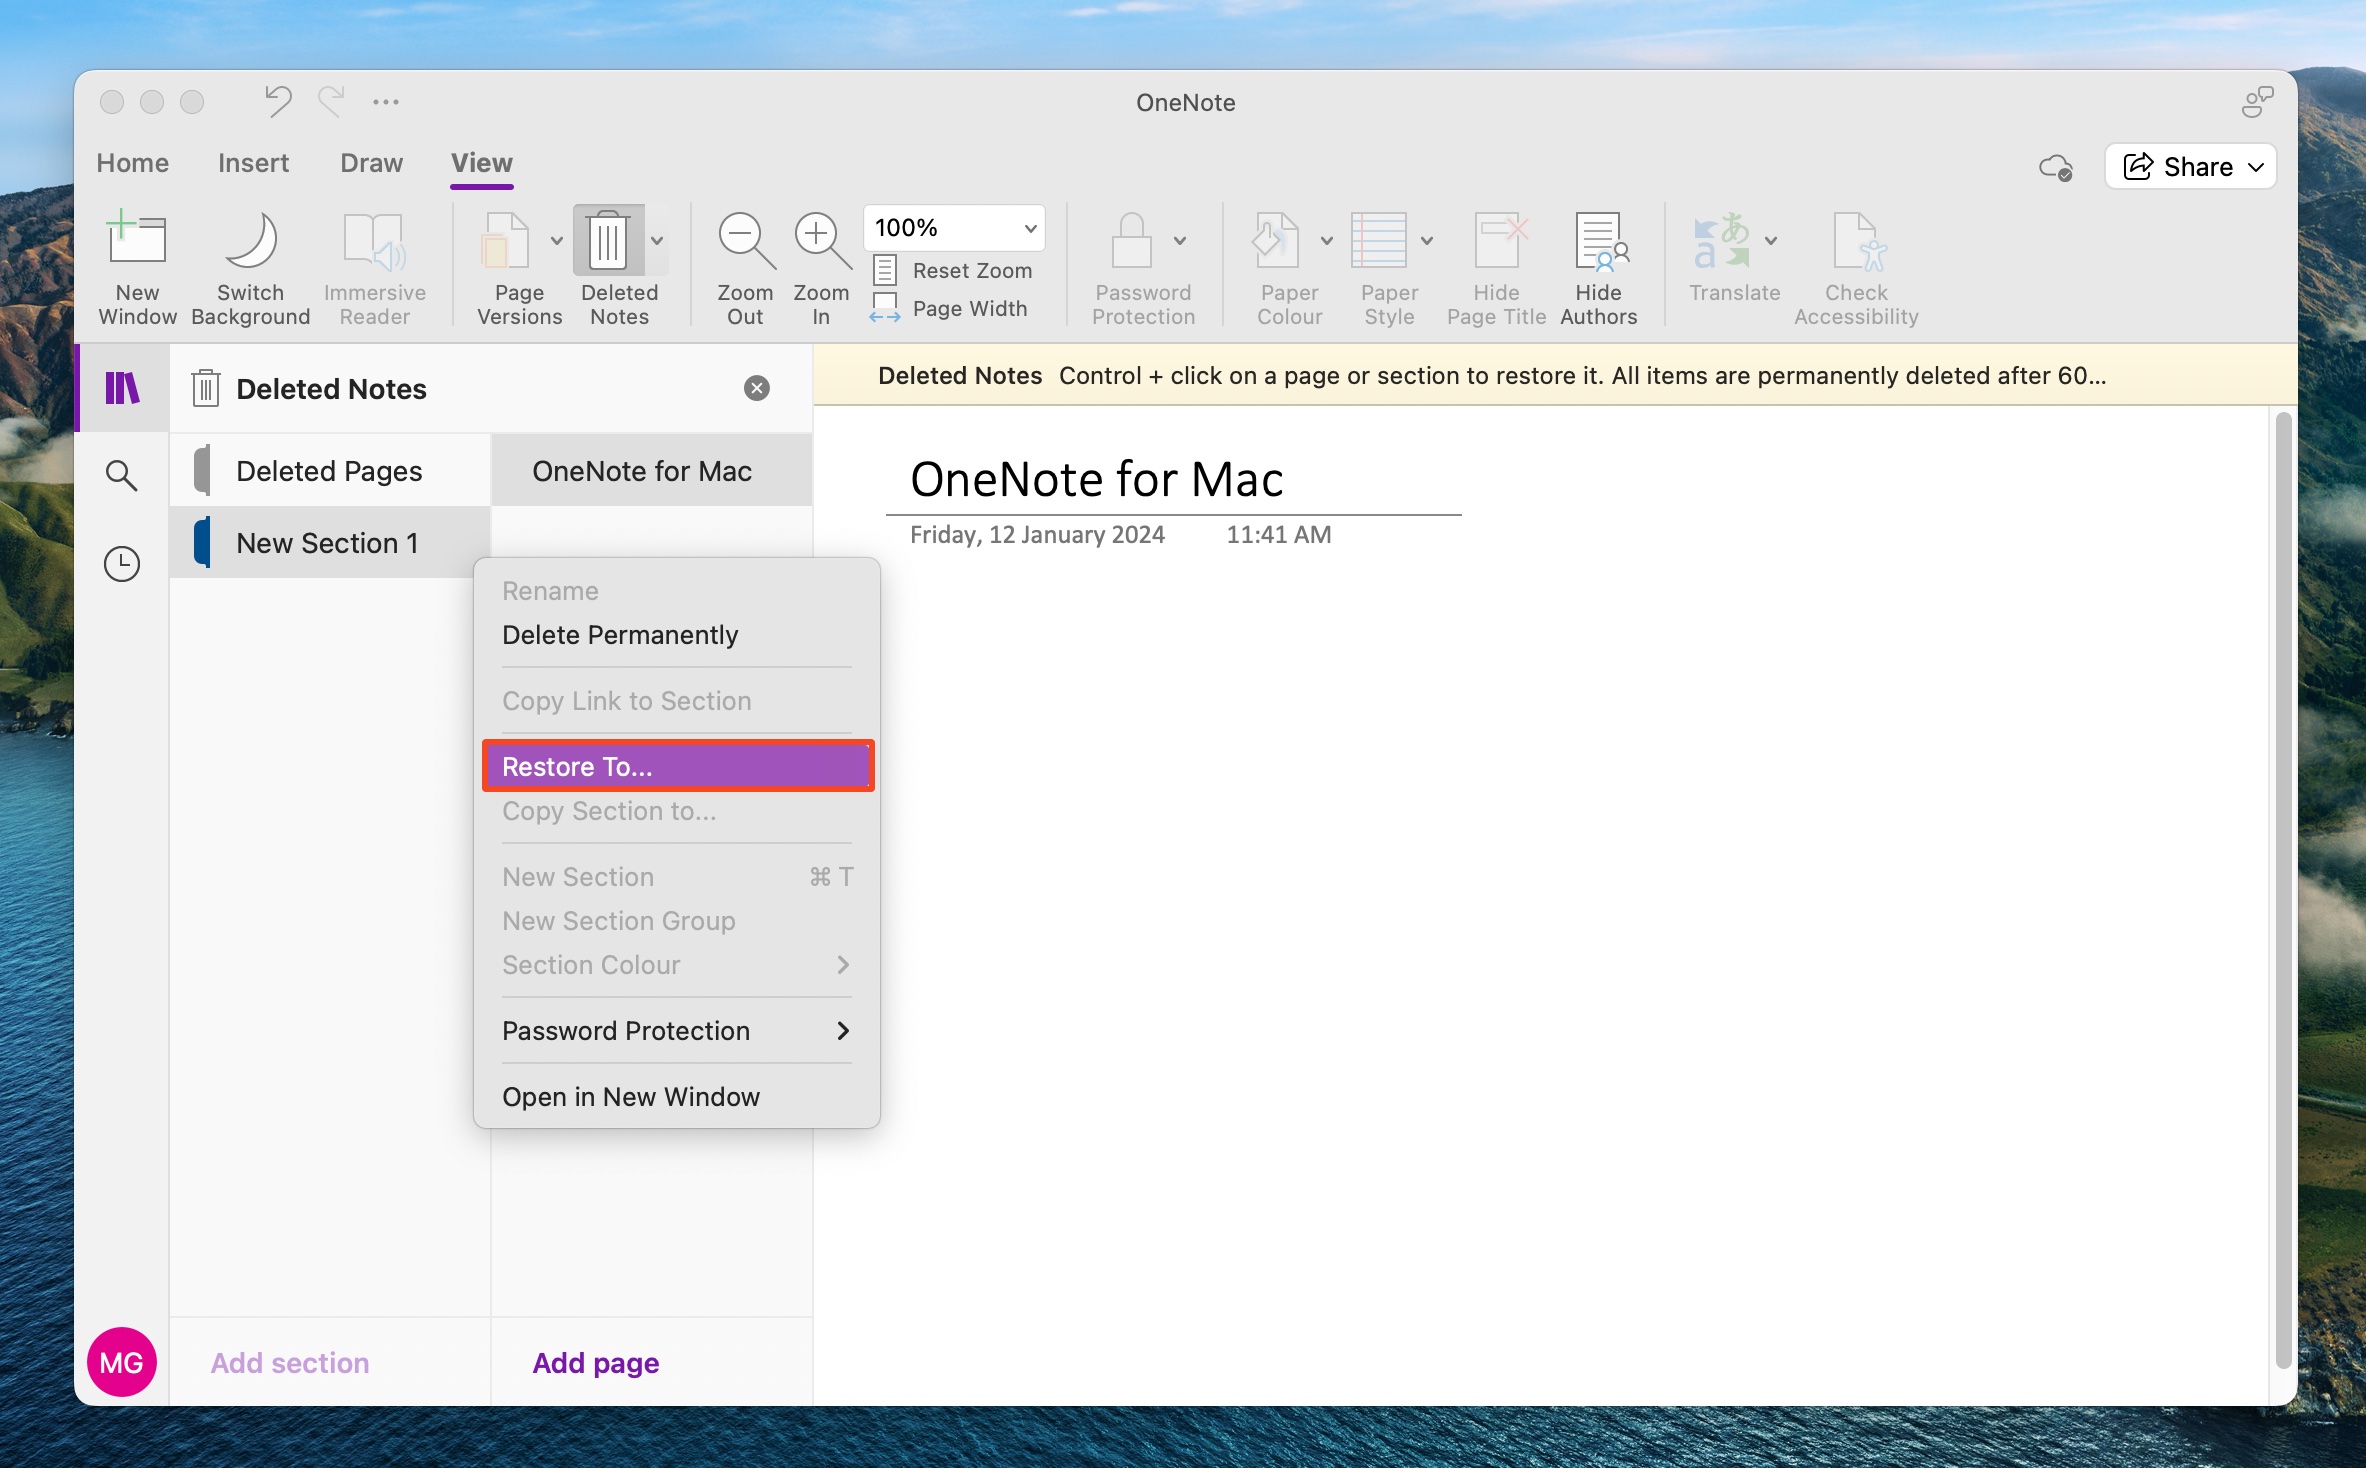 OneNote macOS 'Restore To...'